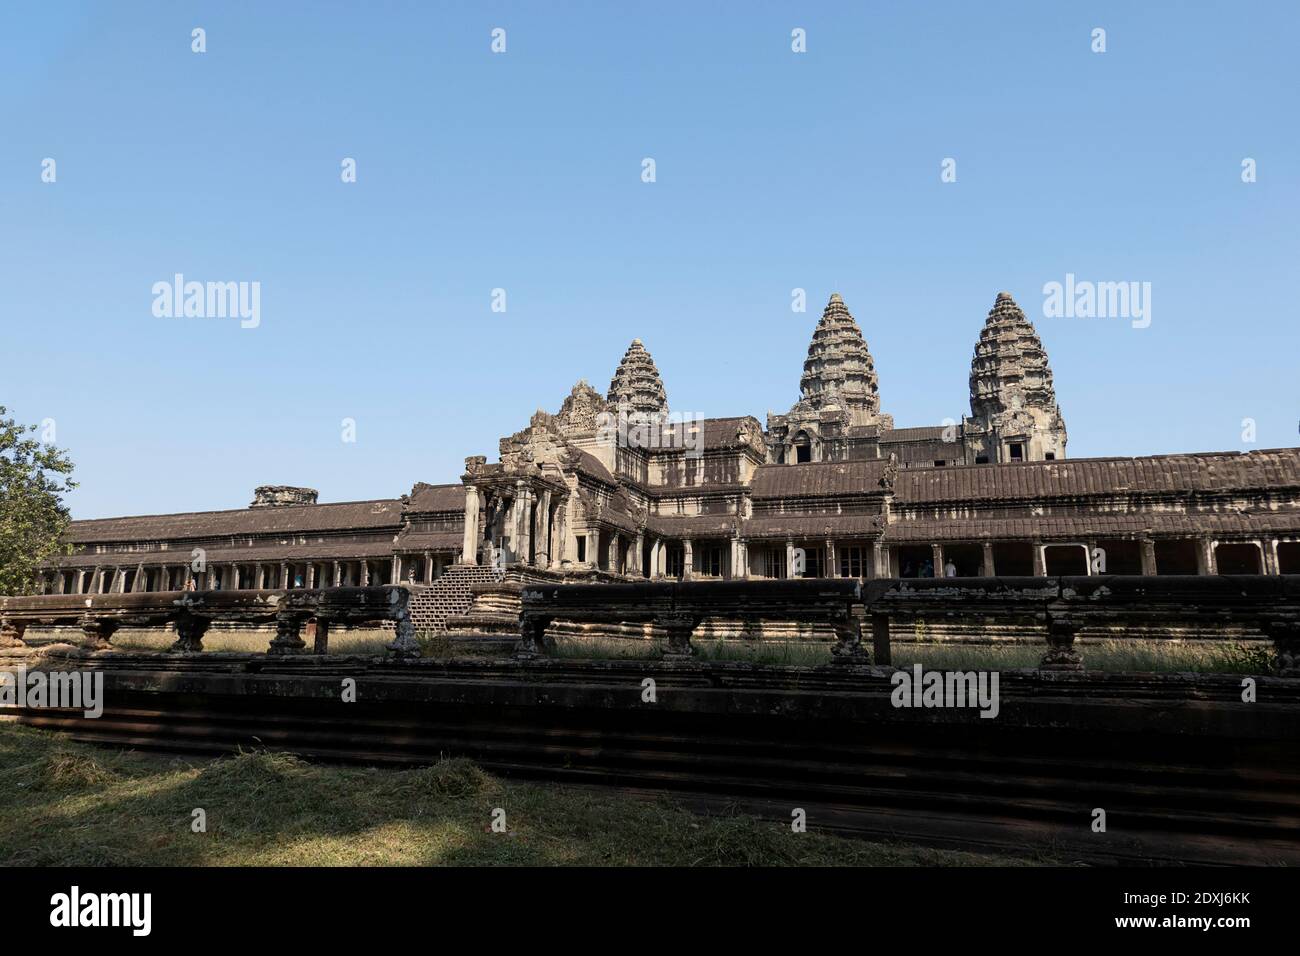 The ancient temple of Angkor Wat Stock Photo